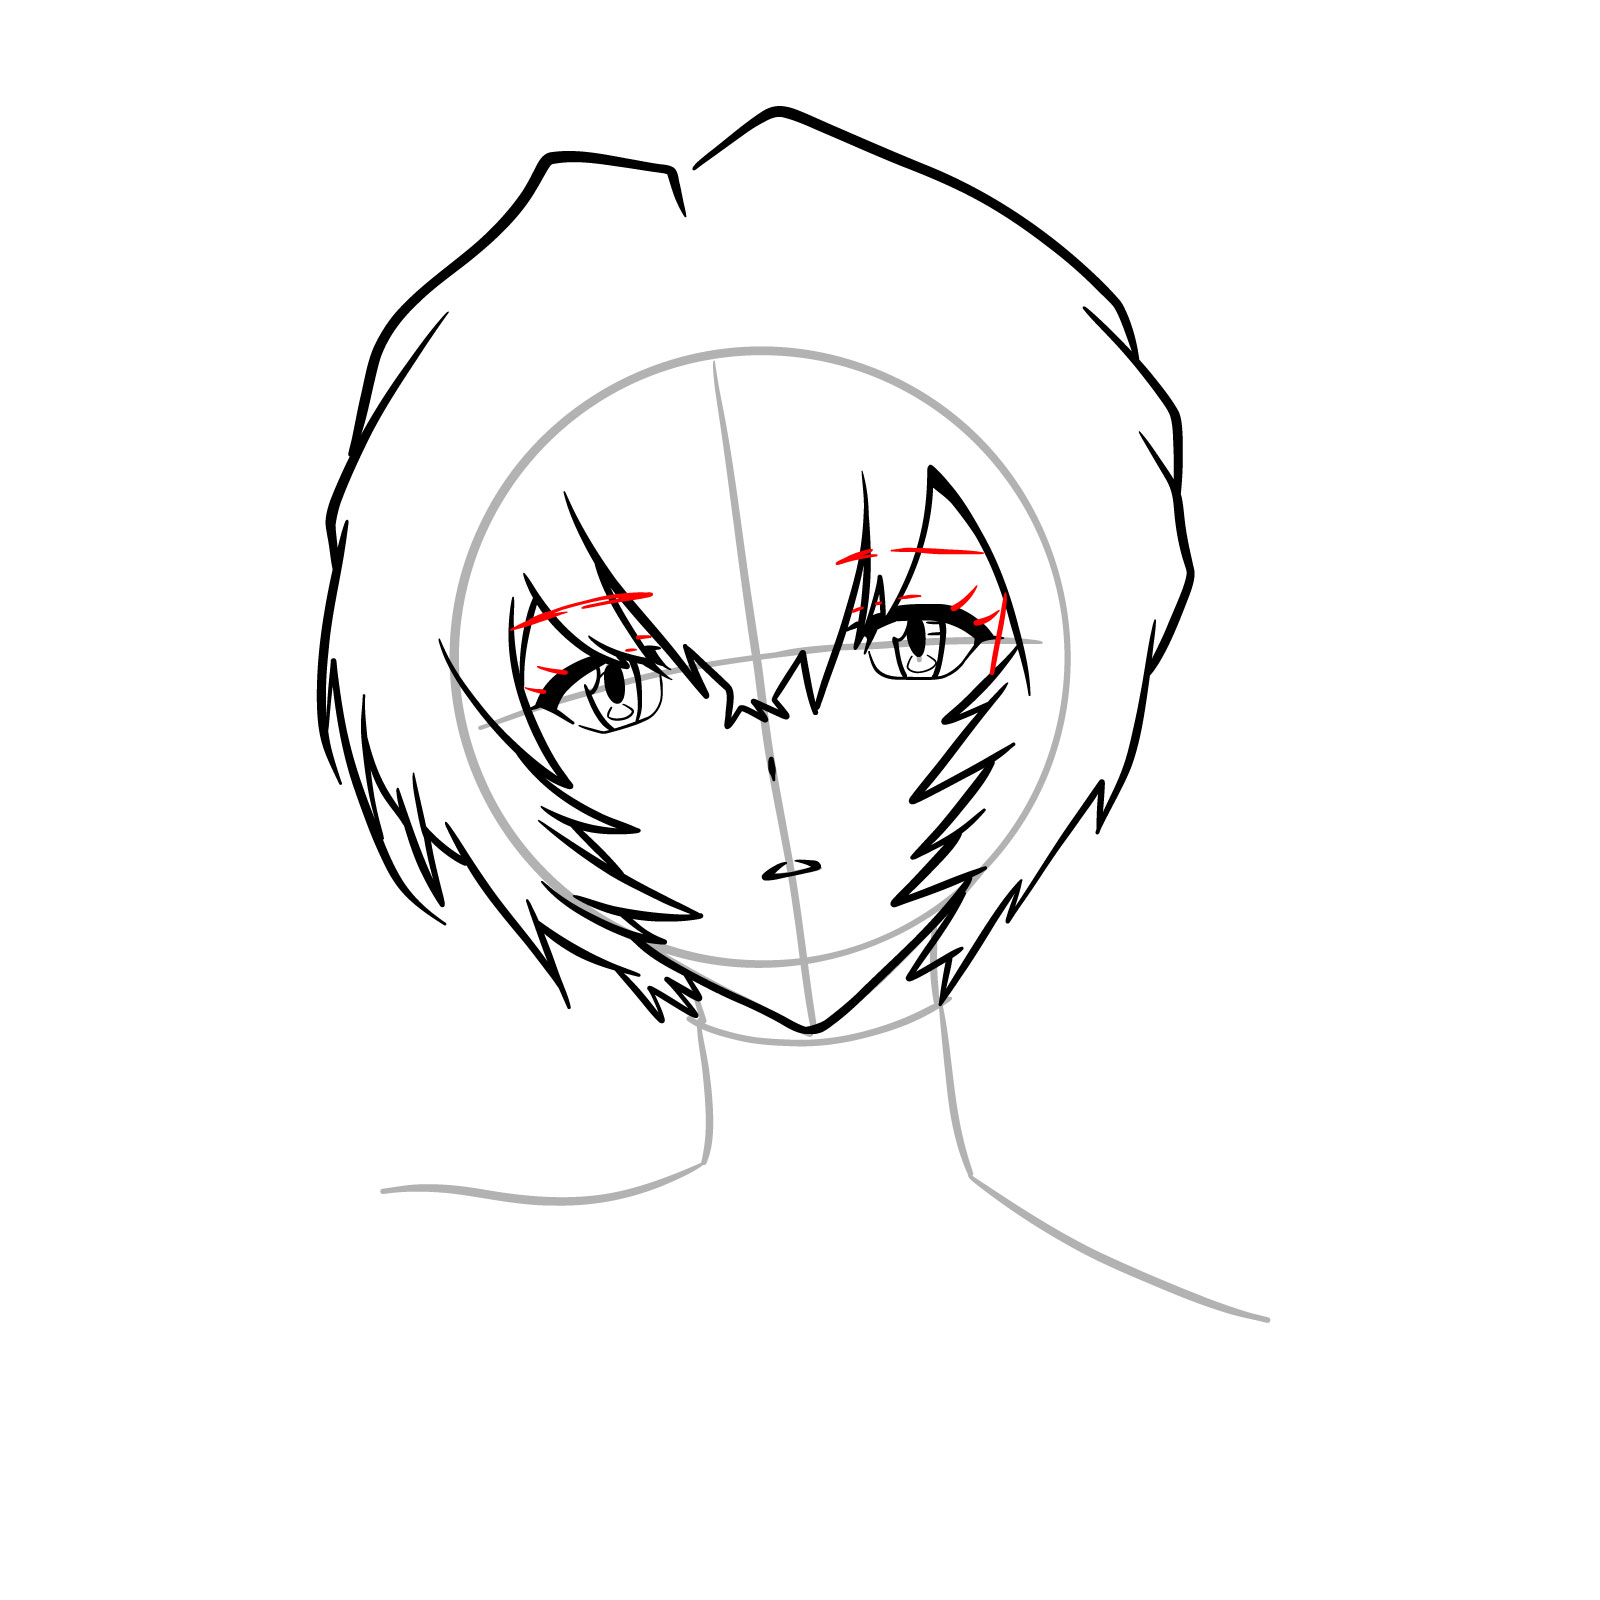 How to draw Rei Ayanami's face - Evangelion - step 13